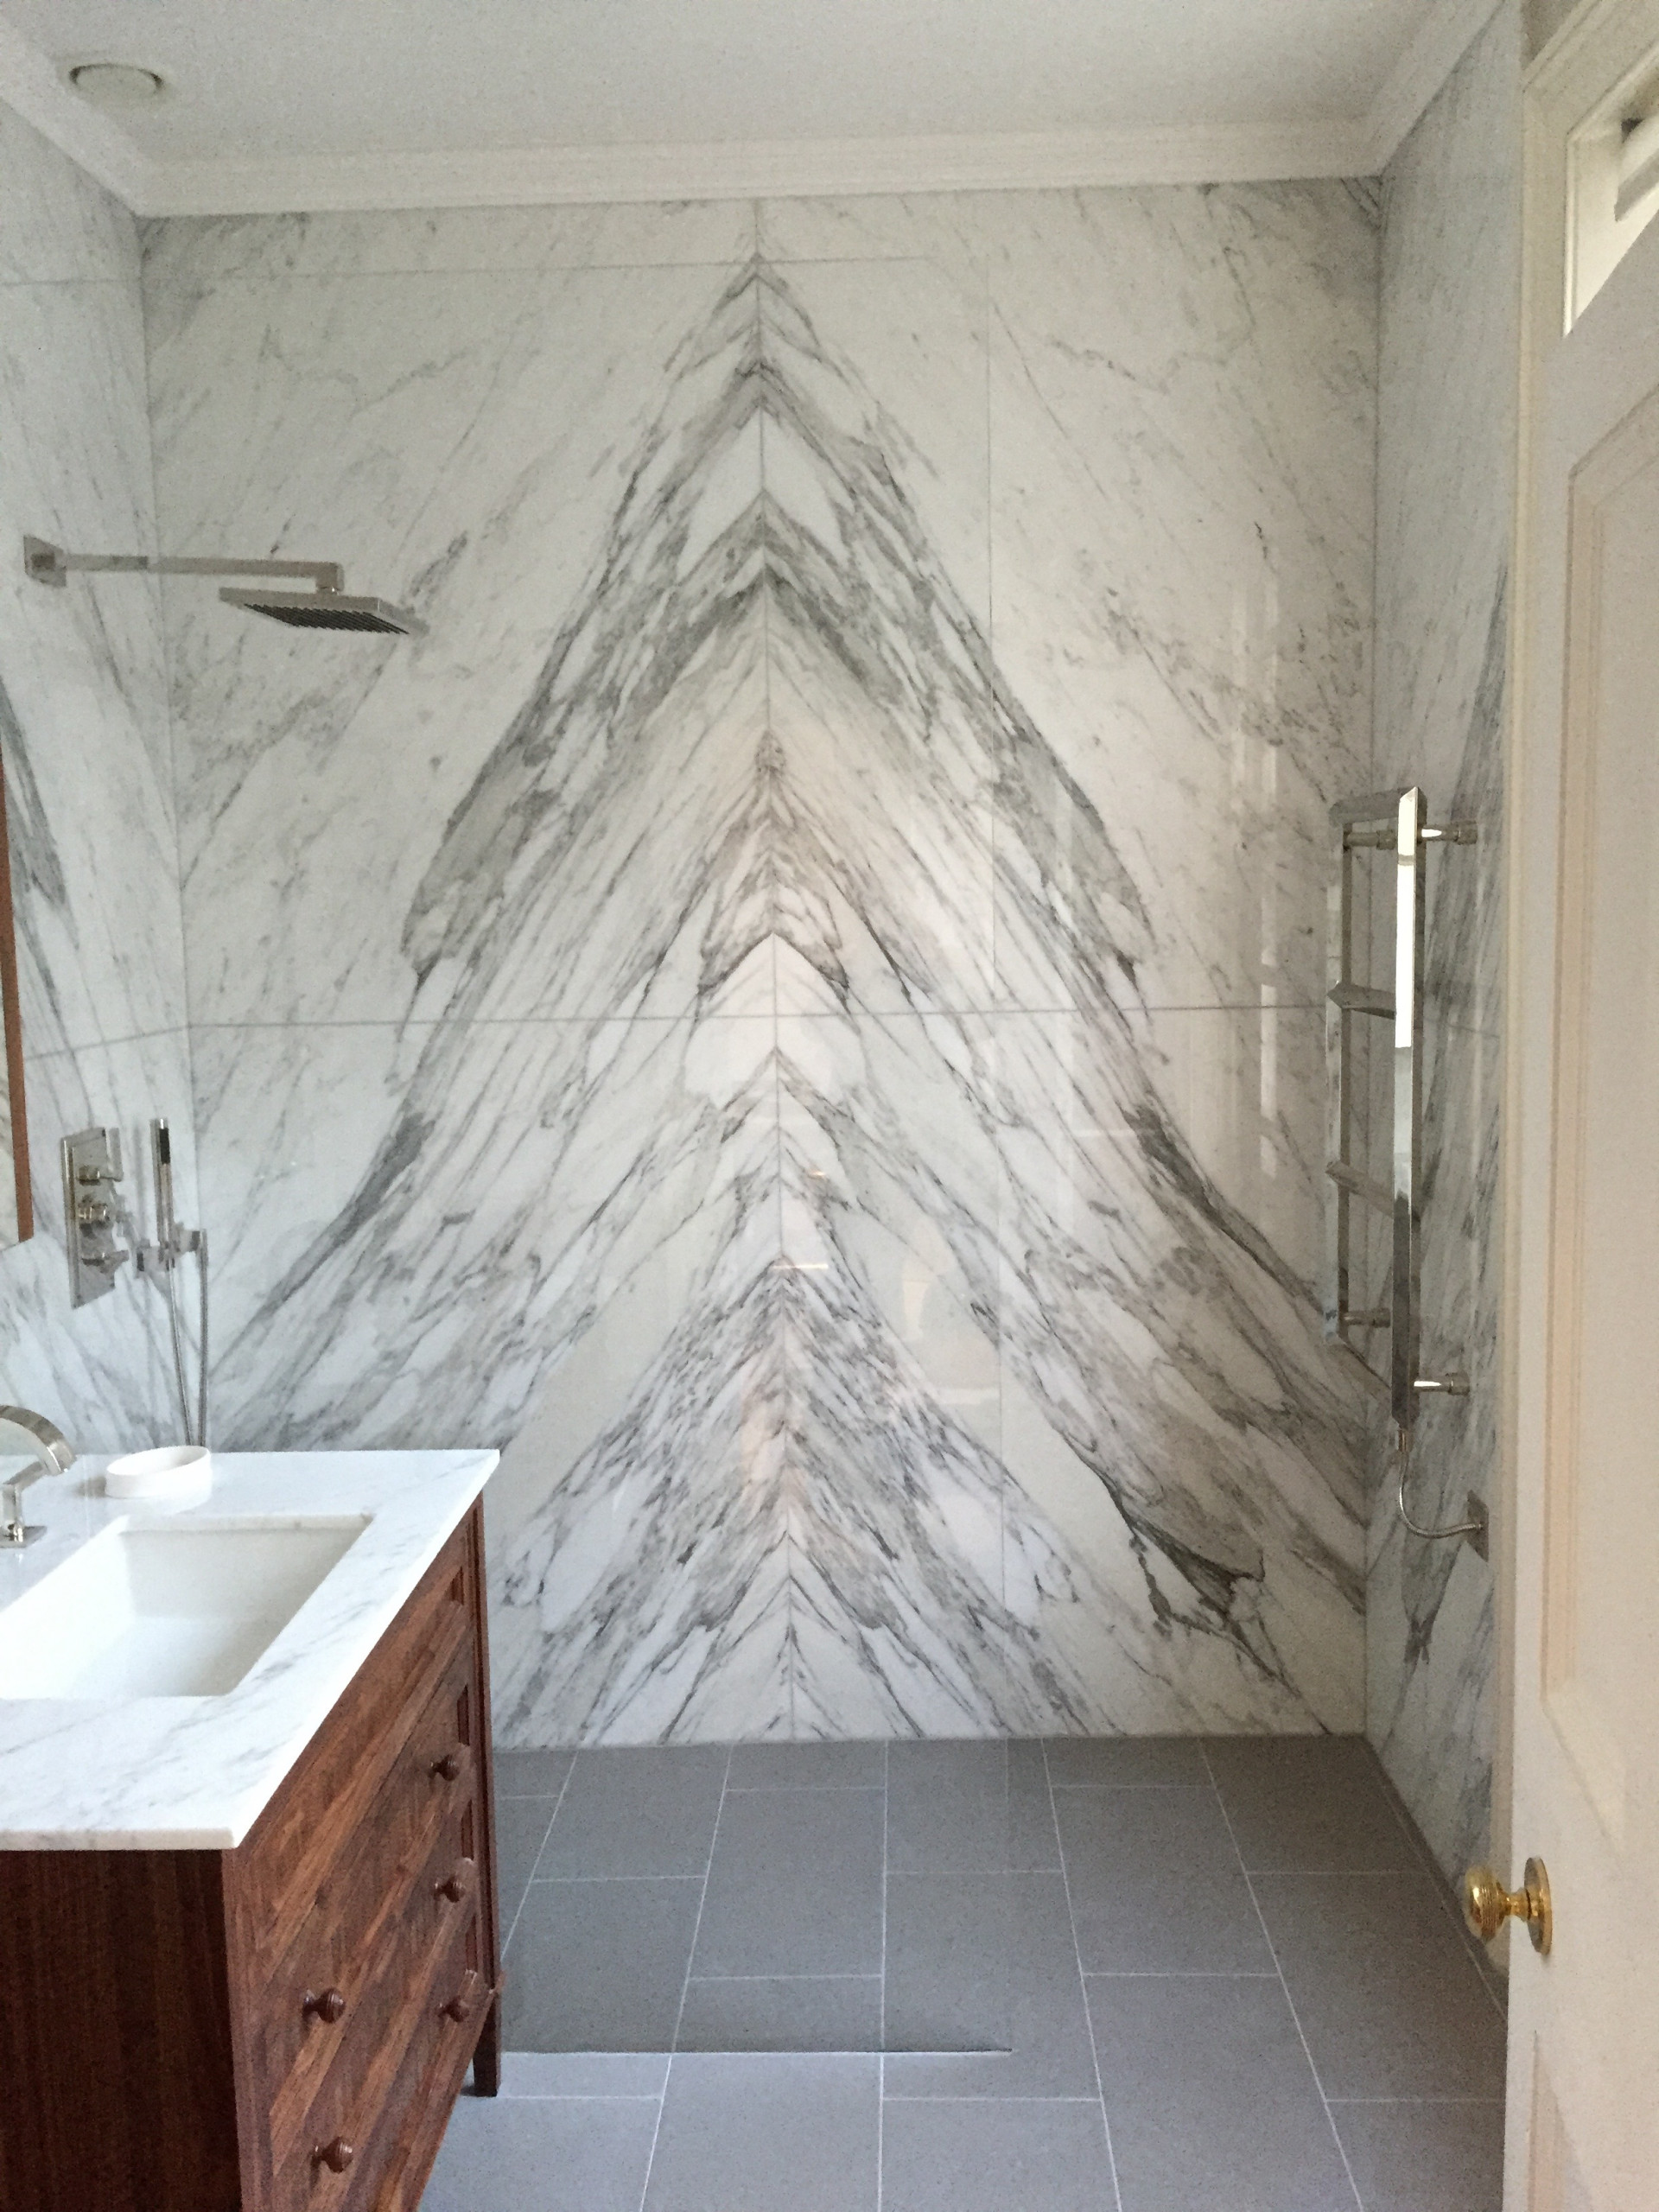 Amazing shower room, featuring an amazing loo seat & Calacatta marble